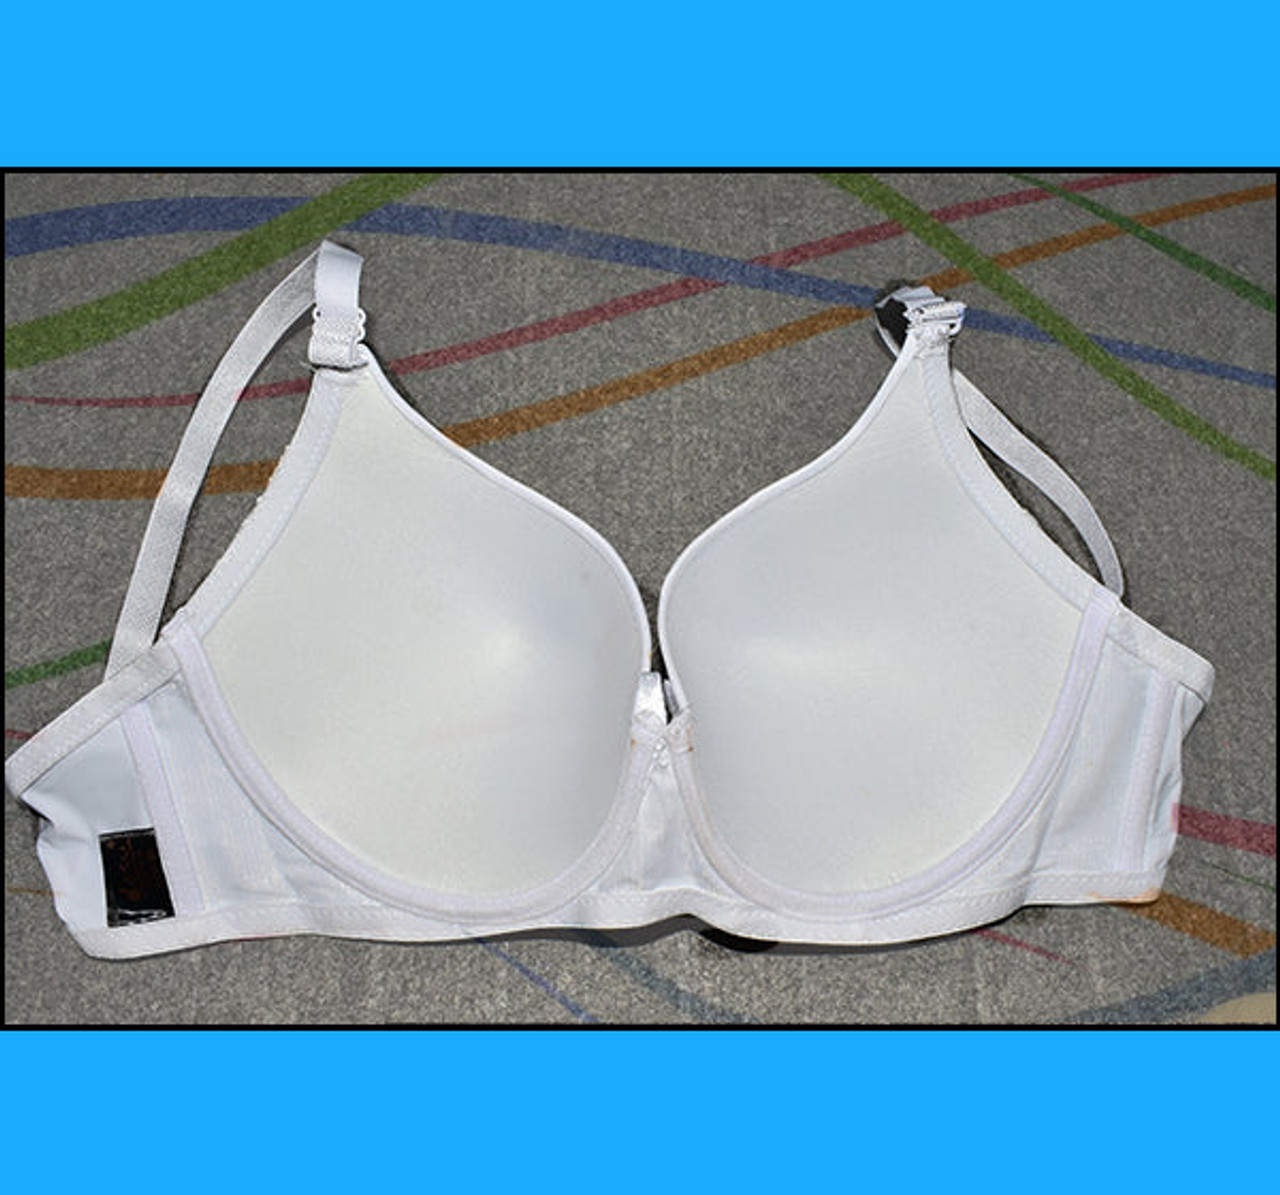 Buy Online Plain Lacey Design Padded Wired Bra Design at